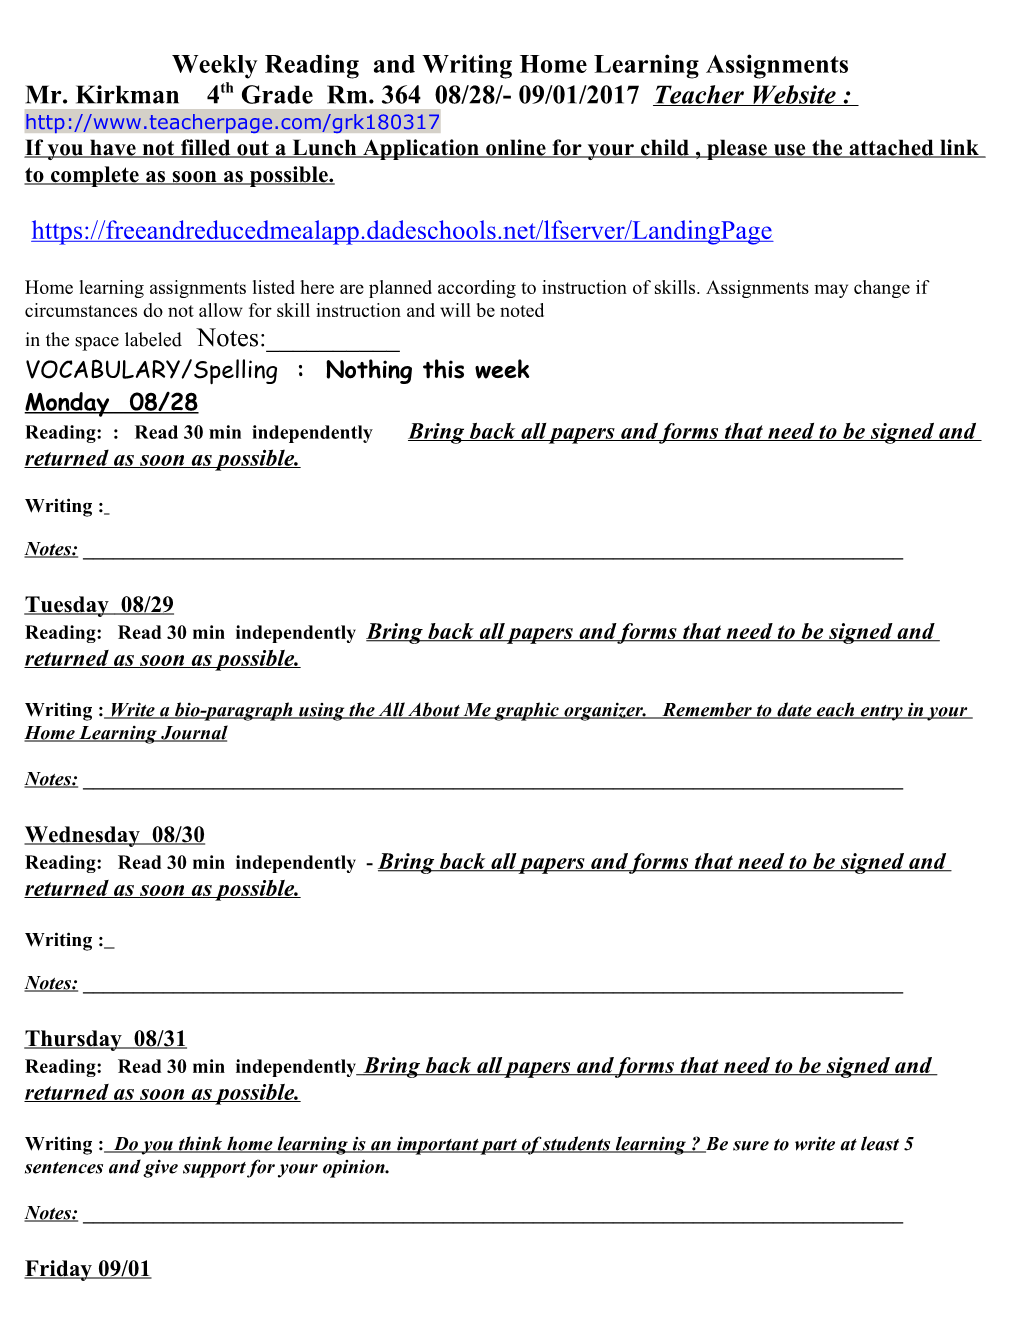 Weekly Science and Math Home Learning Assignments s1